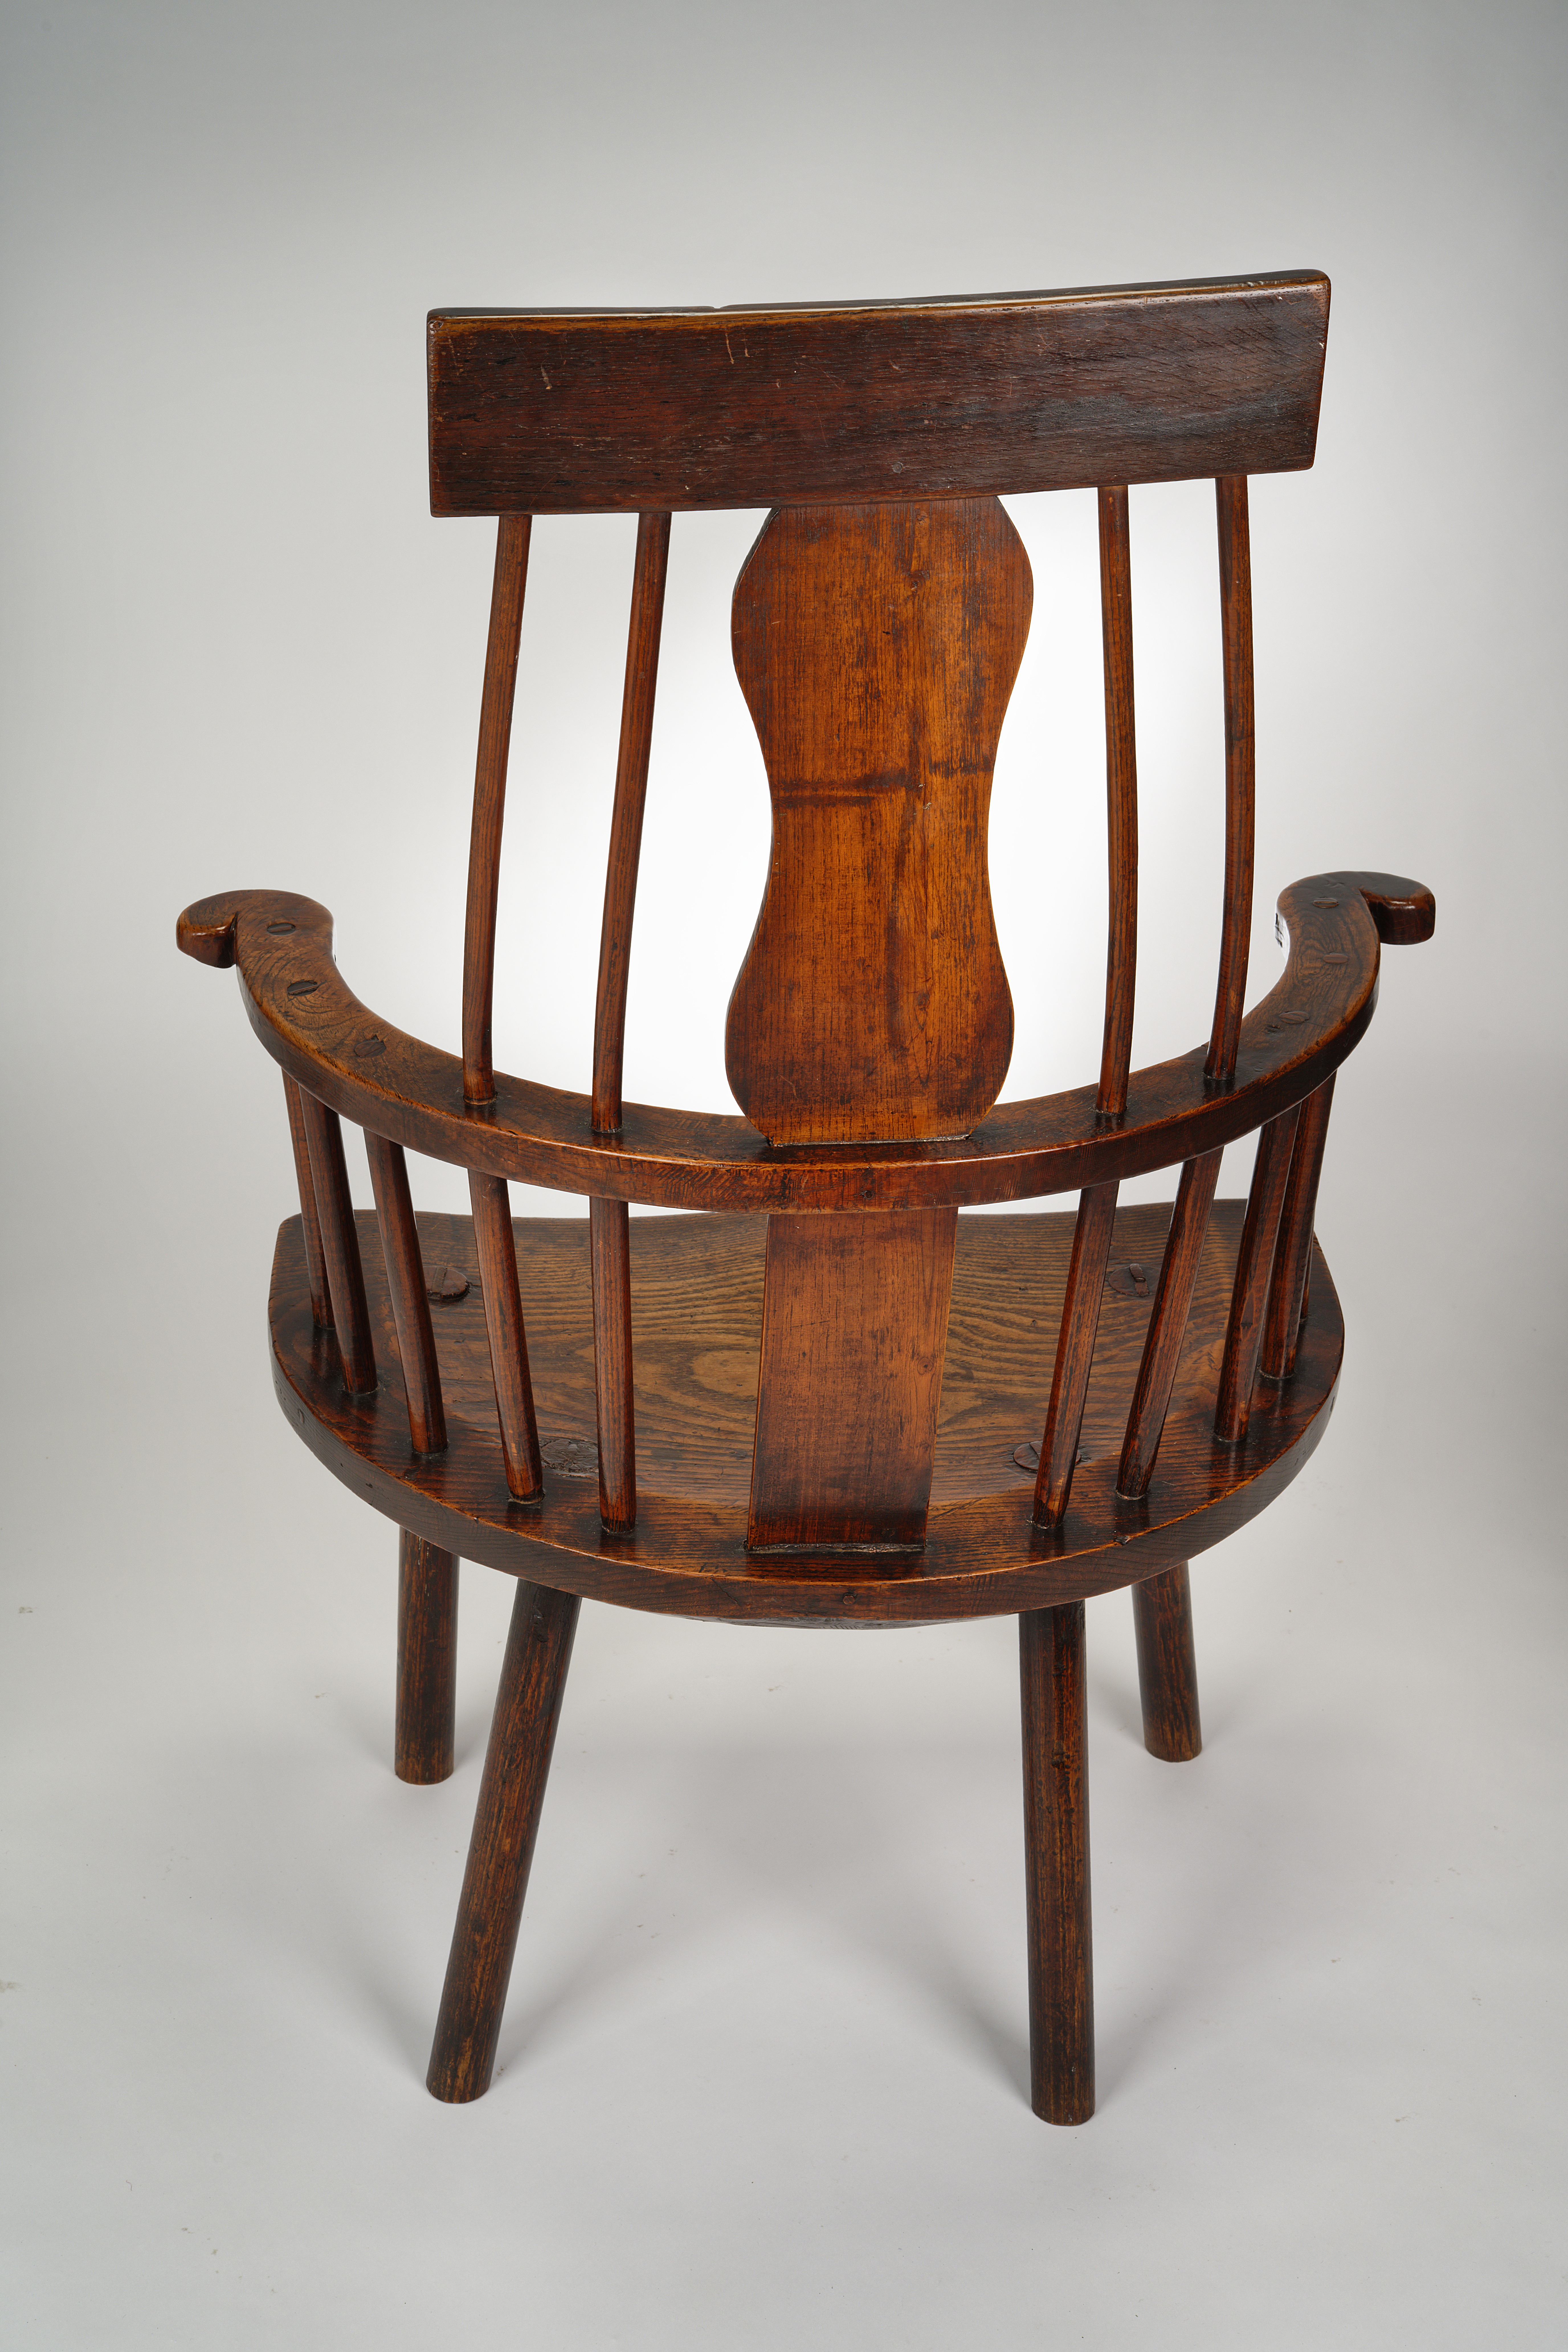 Image of An 18th Century Welsh Primitive Comb-back Windsor Armchair.